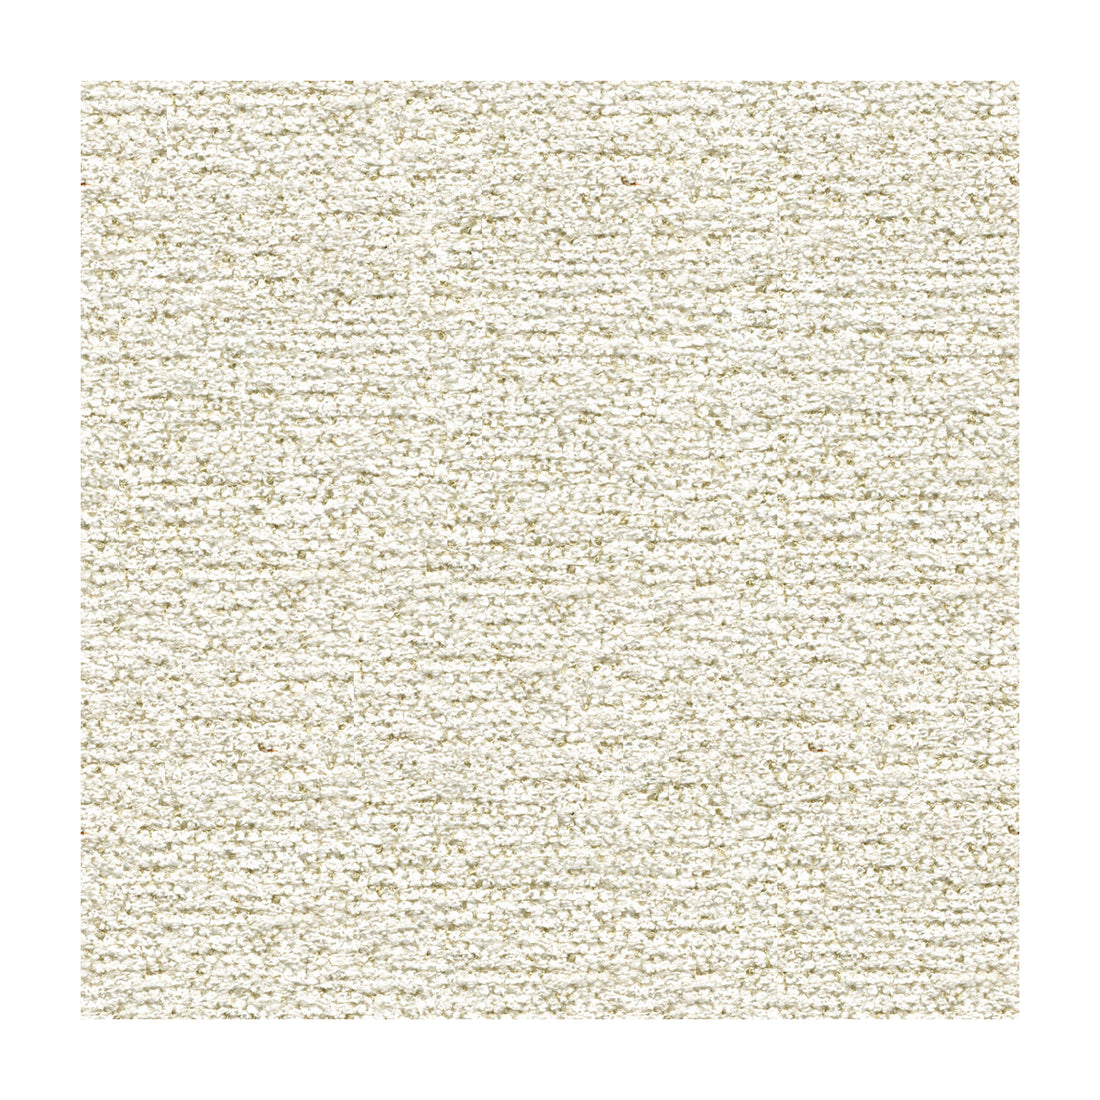 Love Me fabric in champagne color - pattern 33553.1.0 - by Kravet Couture in the Luxury Textures II collection